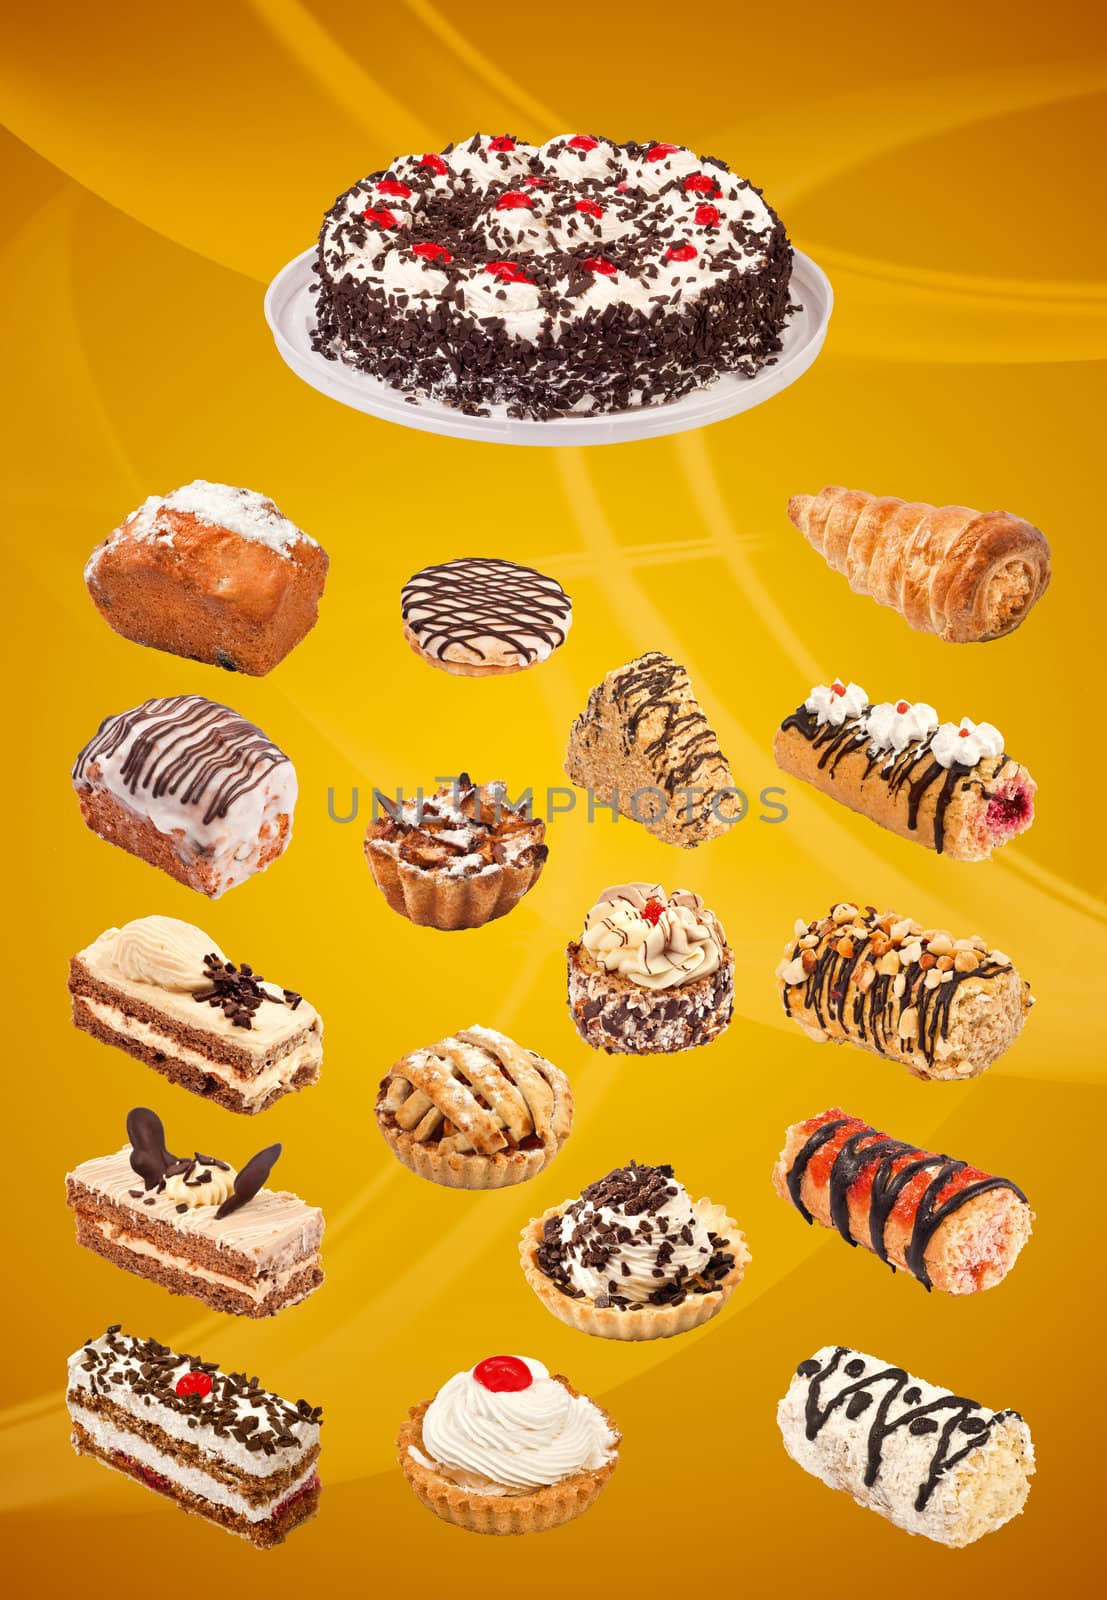 Collage of cakes. File includes detailed clipping path of all cakes for easy background removing